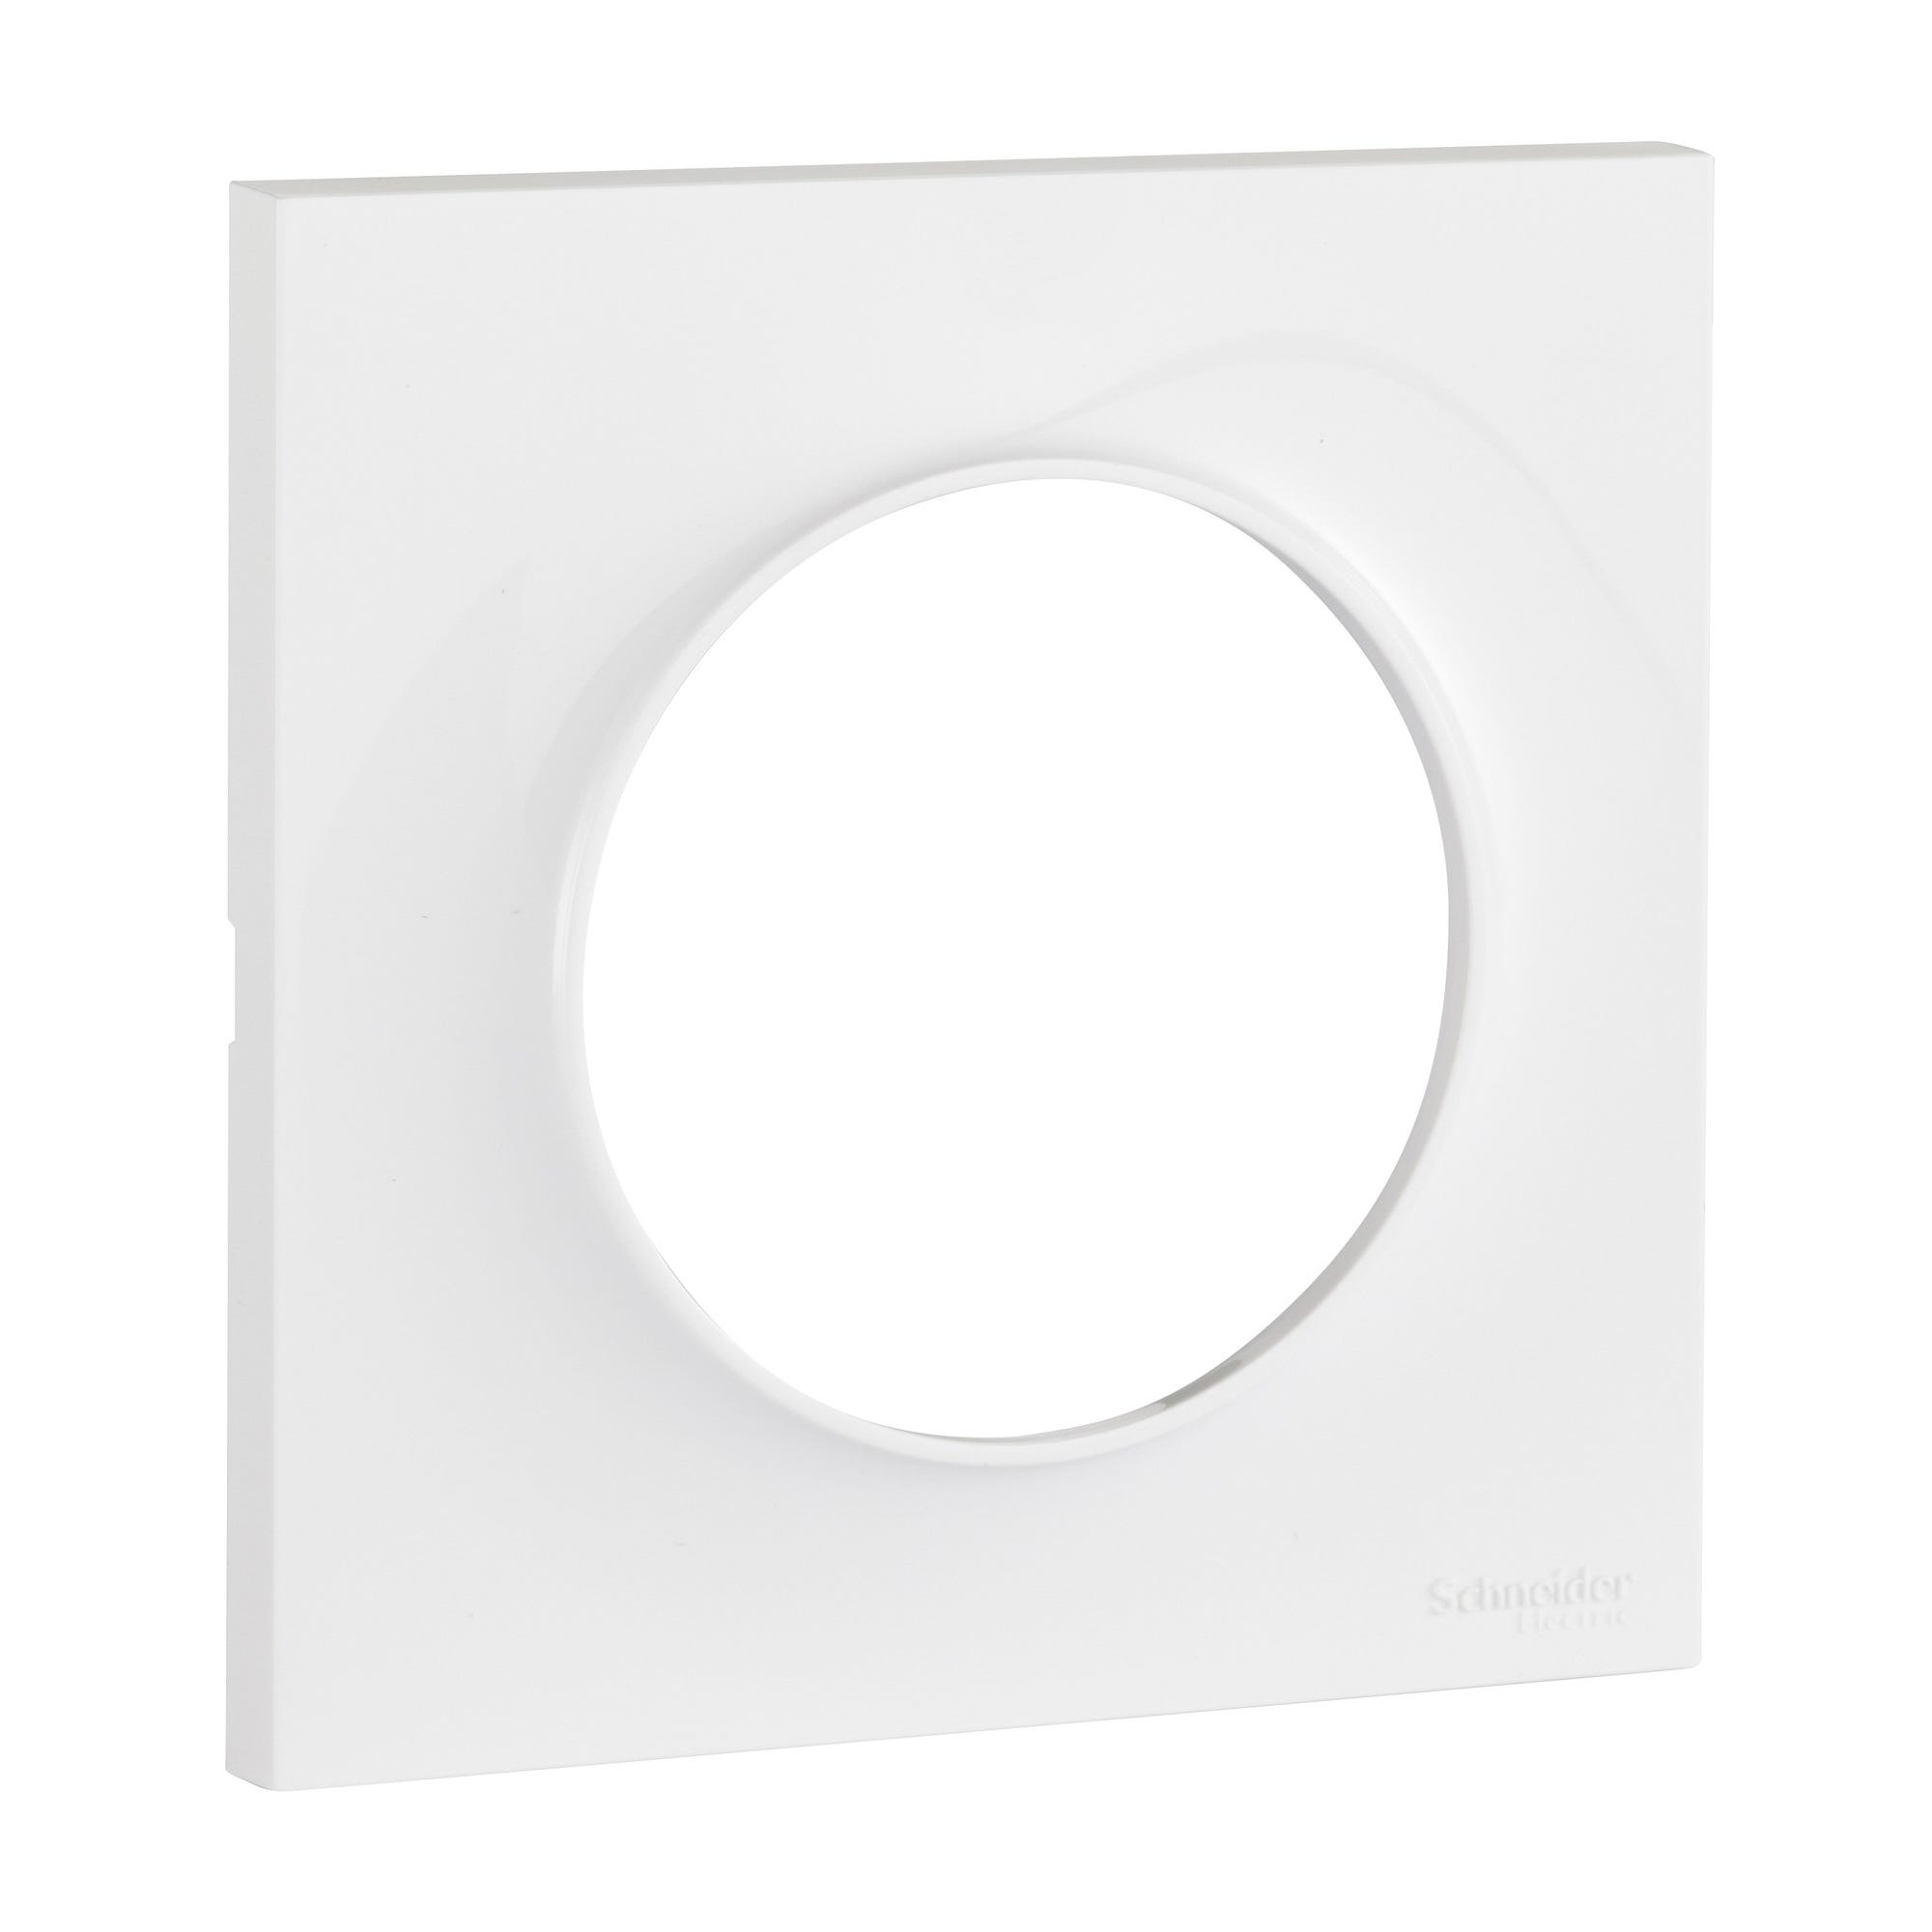 Plaque simple blanc Odace Style - SCHNEIDER ELECTRIC 0